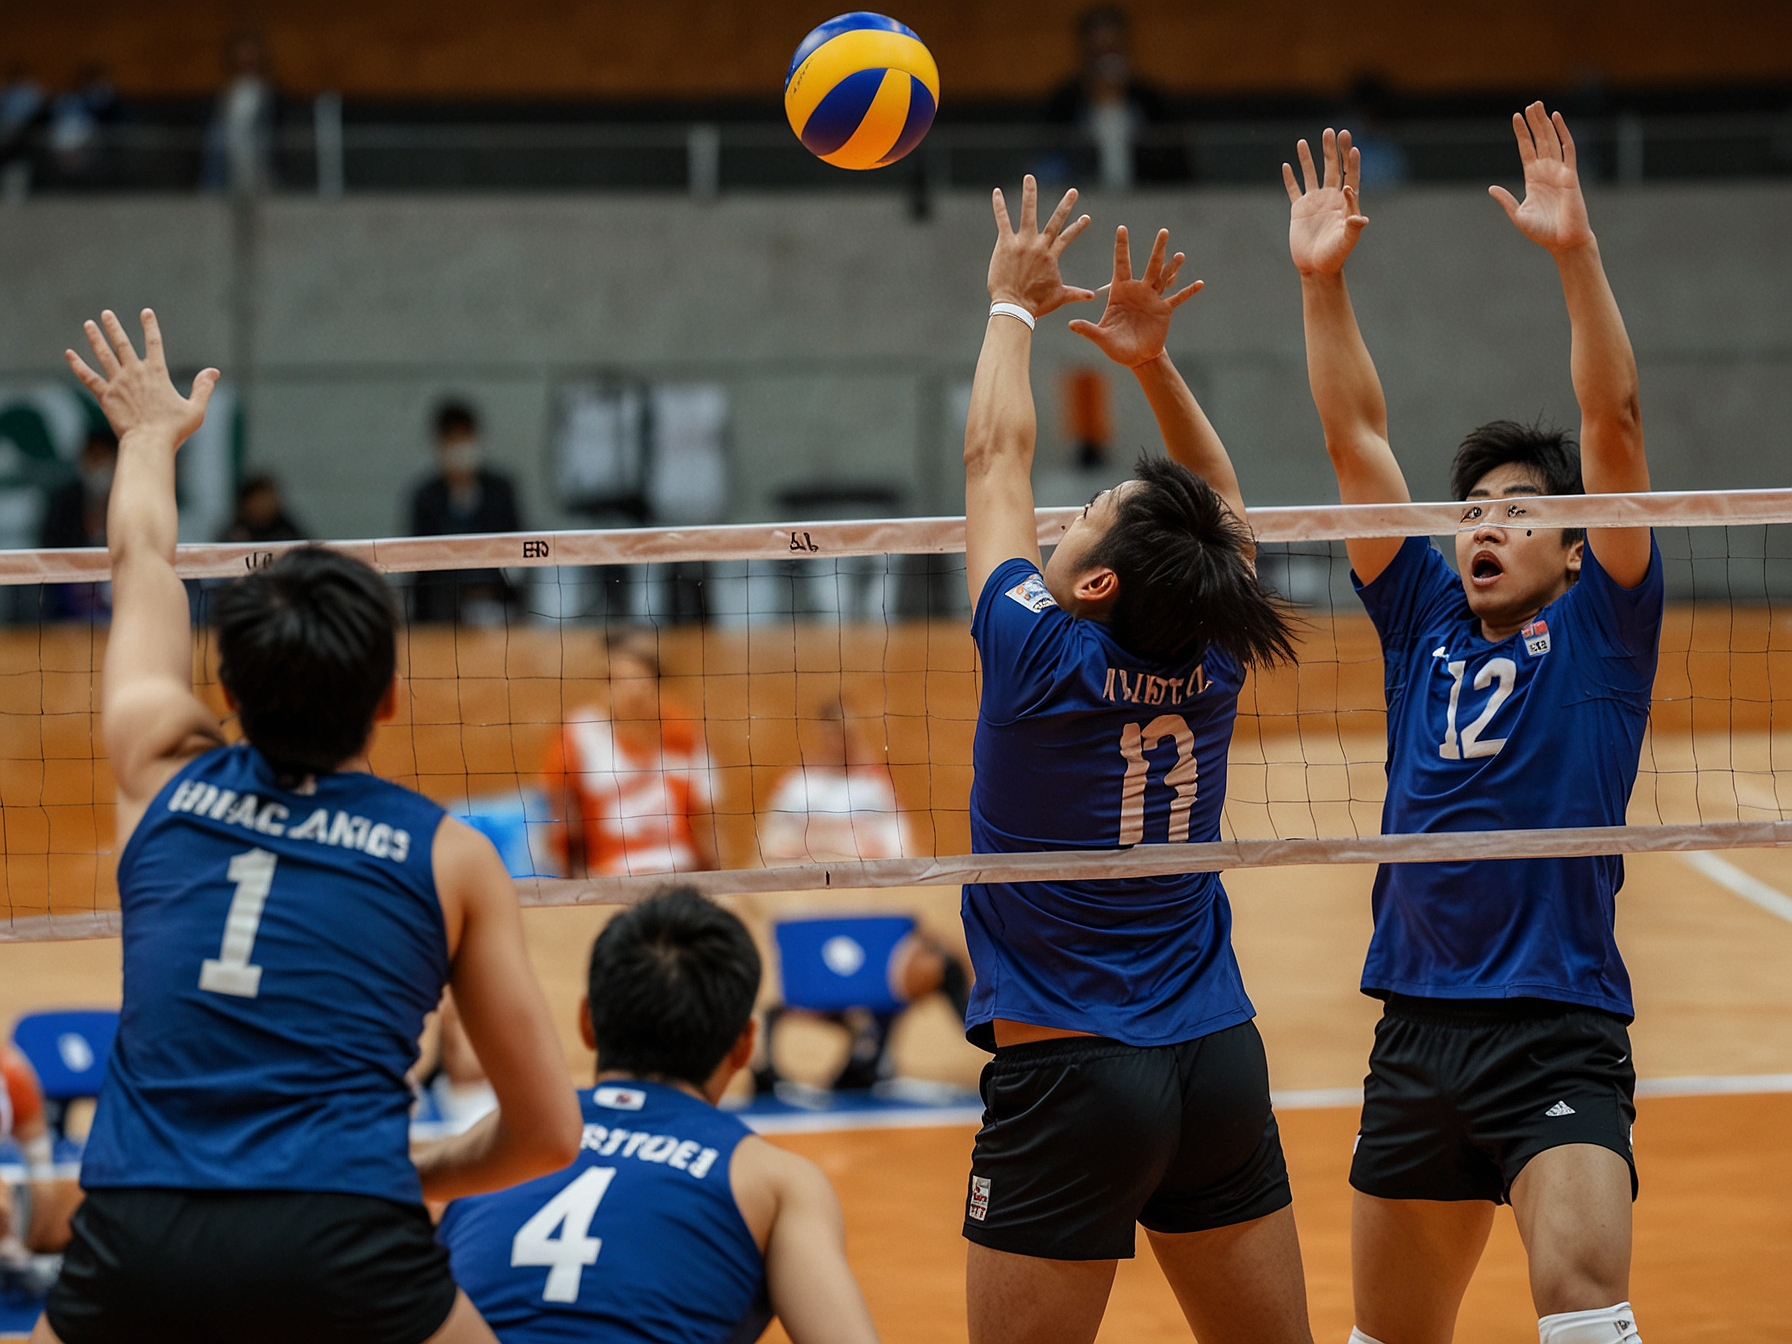 Yuji Nishida powers a spike past the Netherlands' blockers at the net during Japan's sweeping victory in the VNL. His performance was key to setting the tone early in the match.